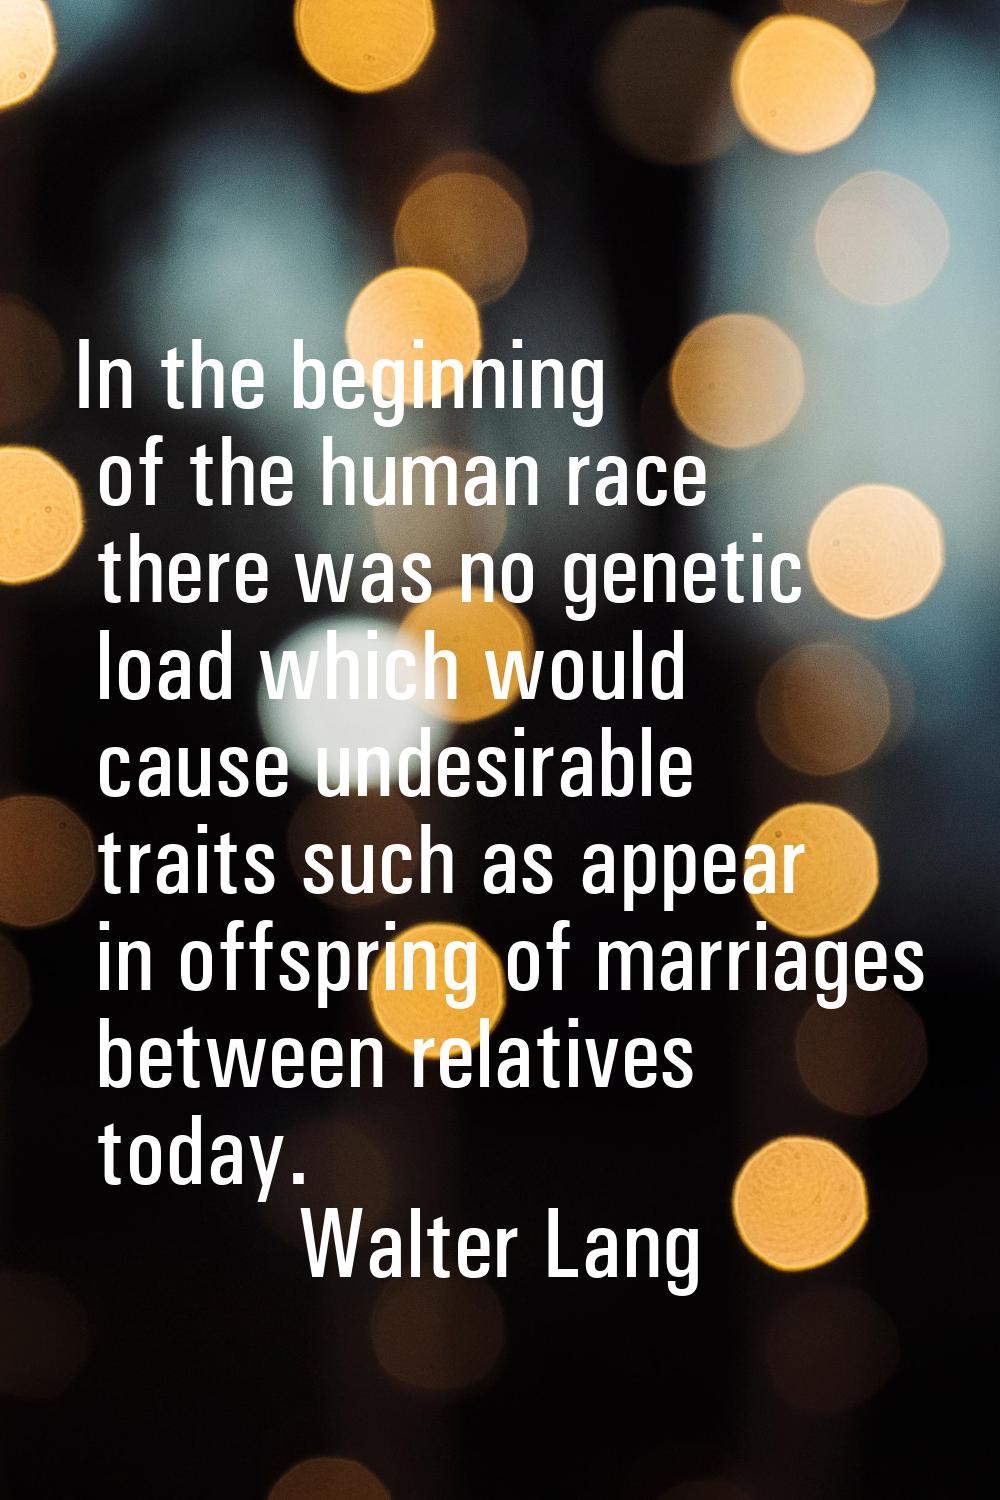 In the beginning of the human race there was no genetic load which would cause undesirable traits s